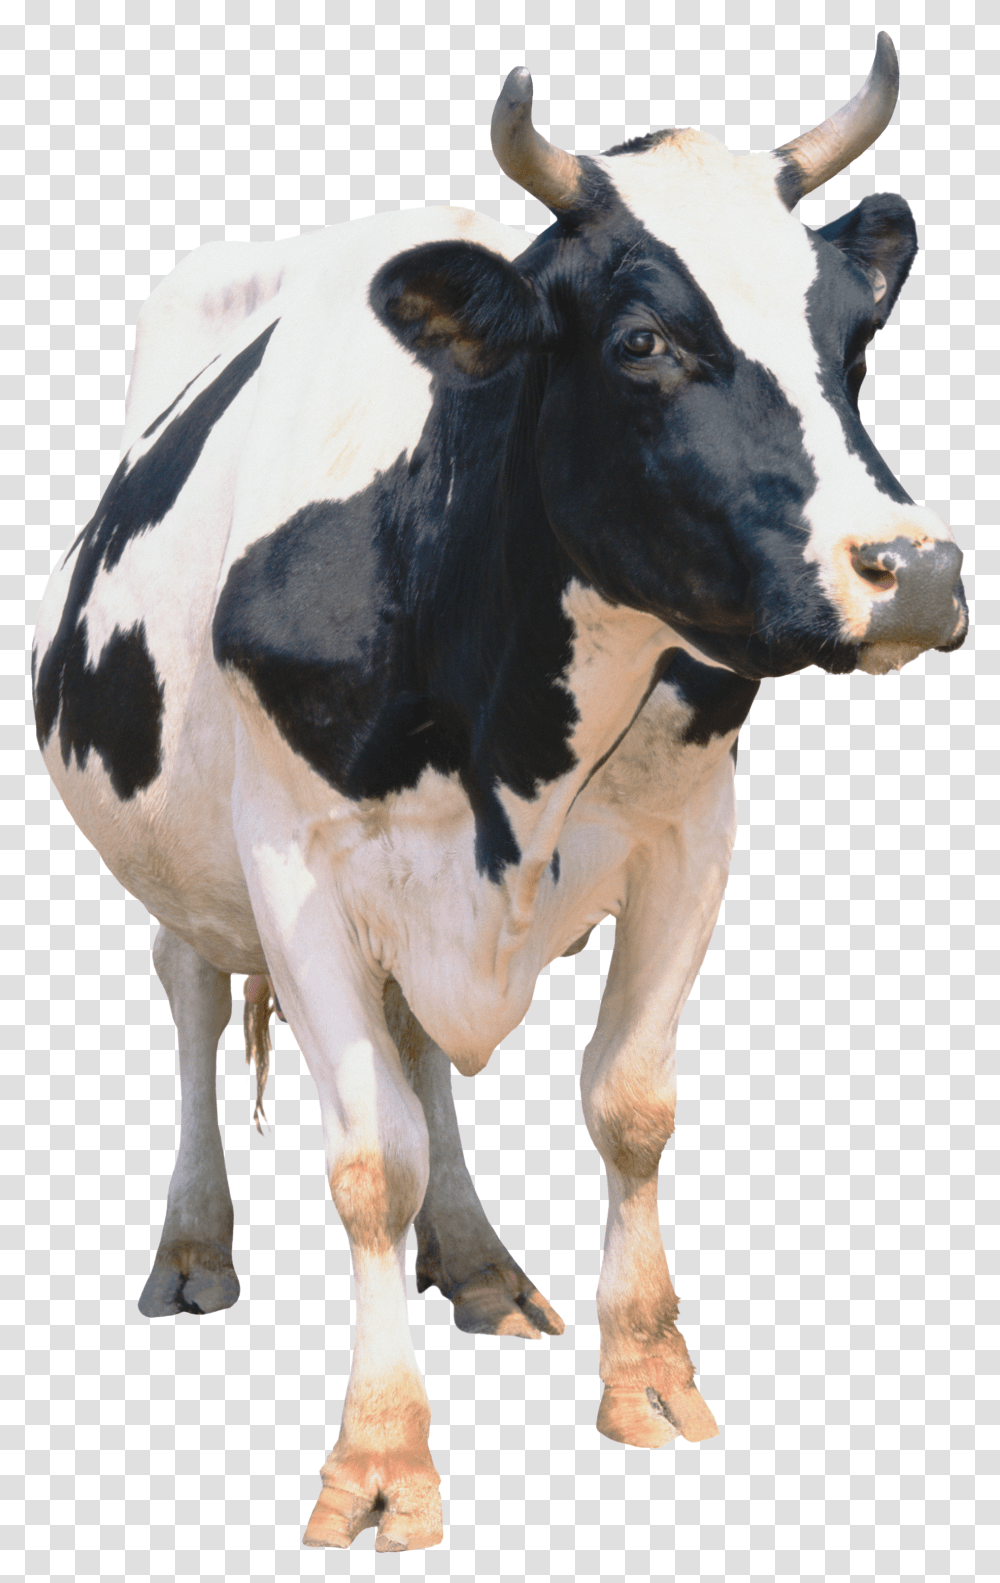 Cow Cattle Transparent Png